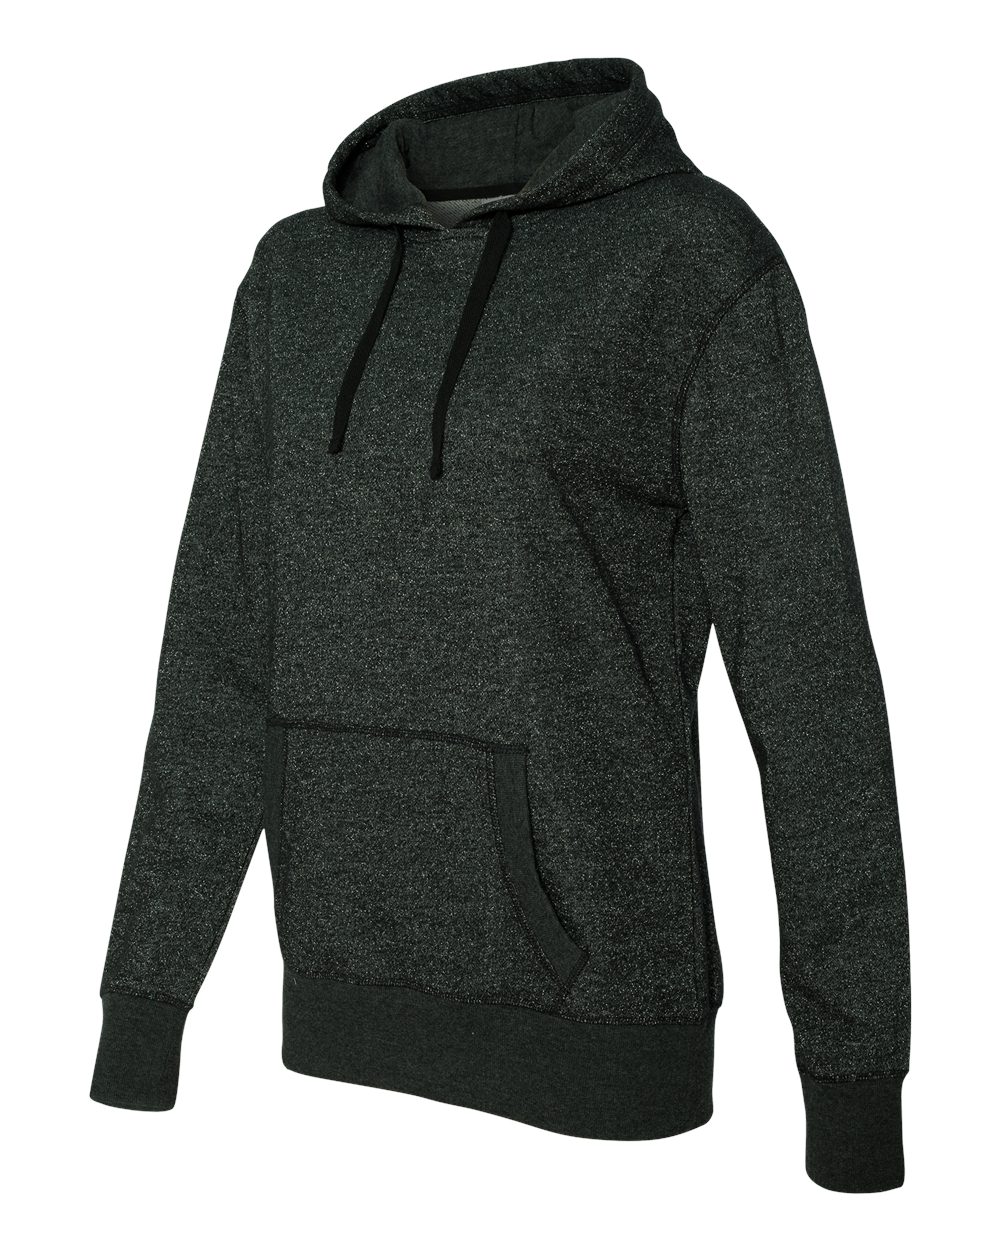 J. America 8860 Women's Glitter French Terry Hooded Pullover